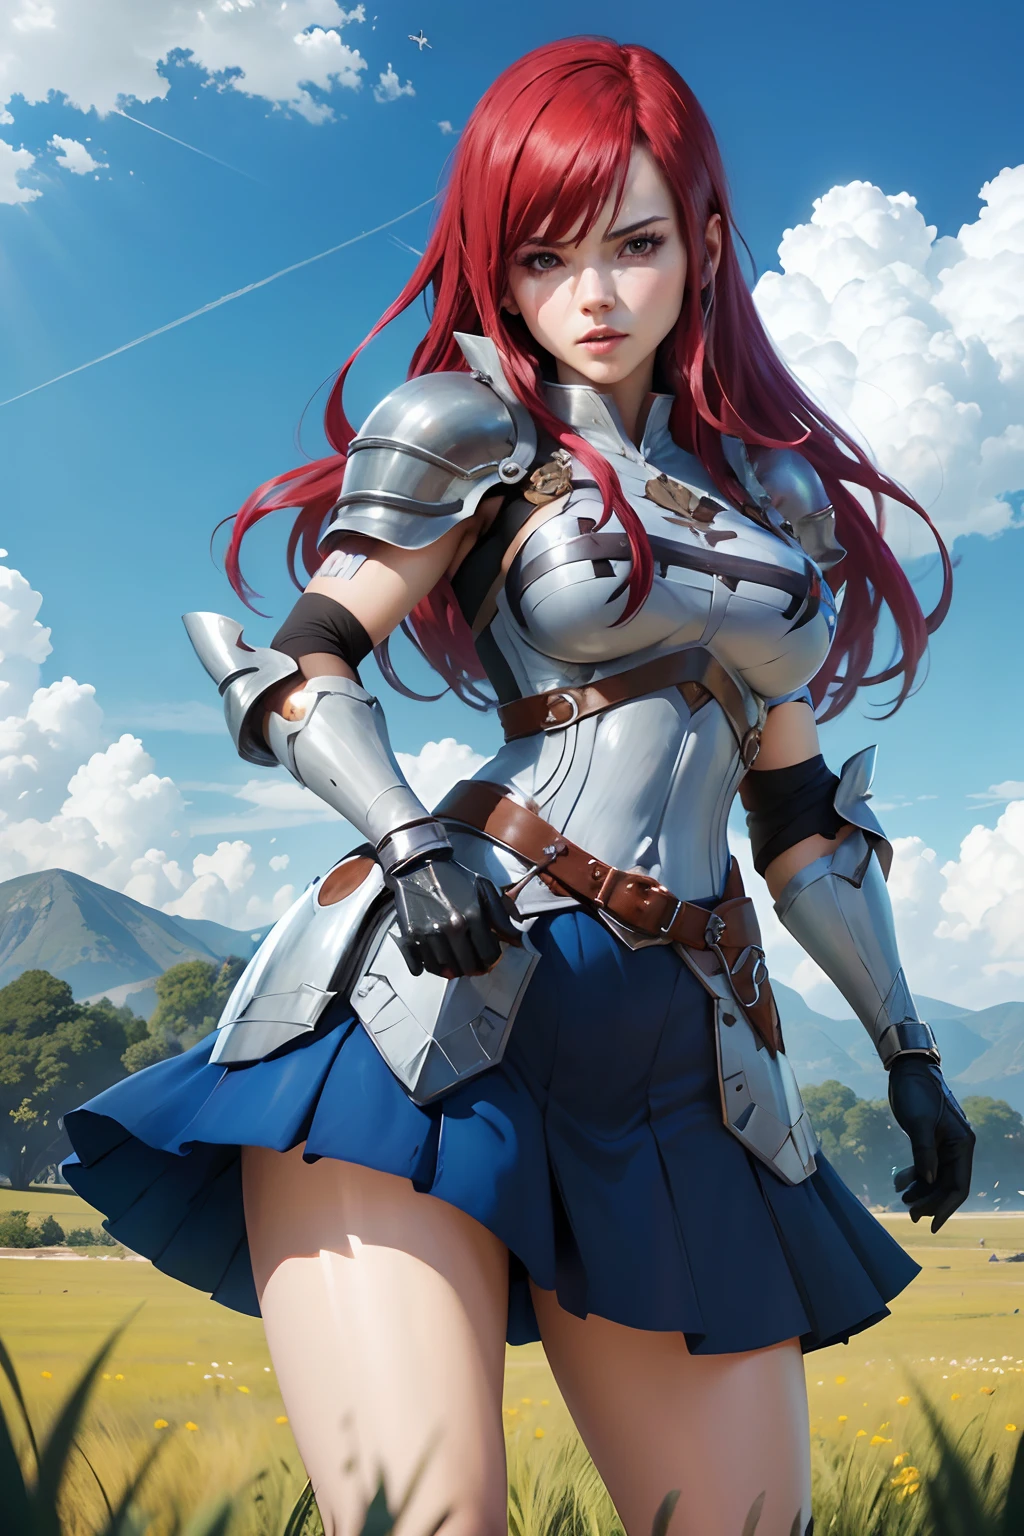 ((Hyper realistic character)), (25 year old Erza Scarlet), Fairy Tail, ((facing, (fully body), perfectbody, intricate body)), legs thick, long hair, Red hair, ((Silver armor)), (blue skirt),  shoulders showing, legs showing, long socks, /hyper realist, extreme quality, maximum details, max quality, Hyper realistic Cinematic lighting/